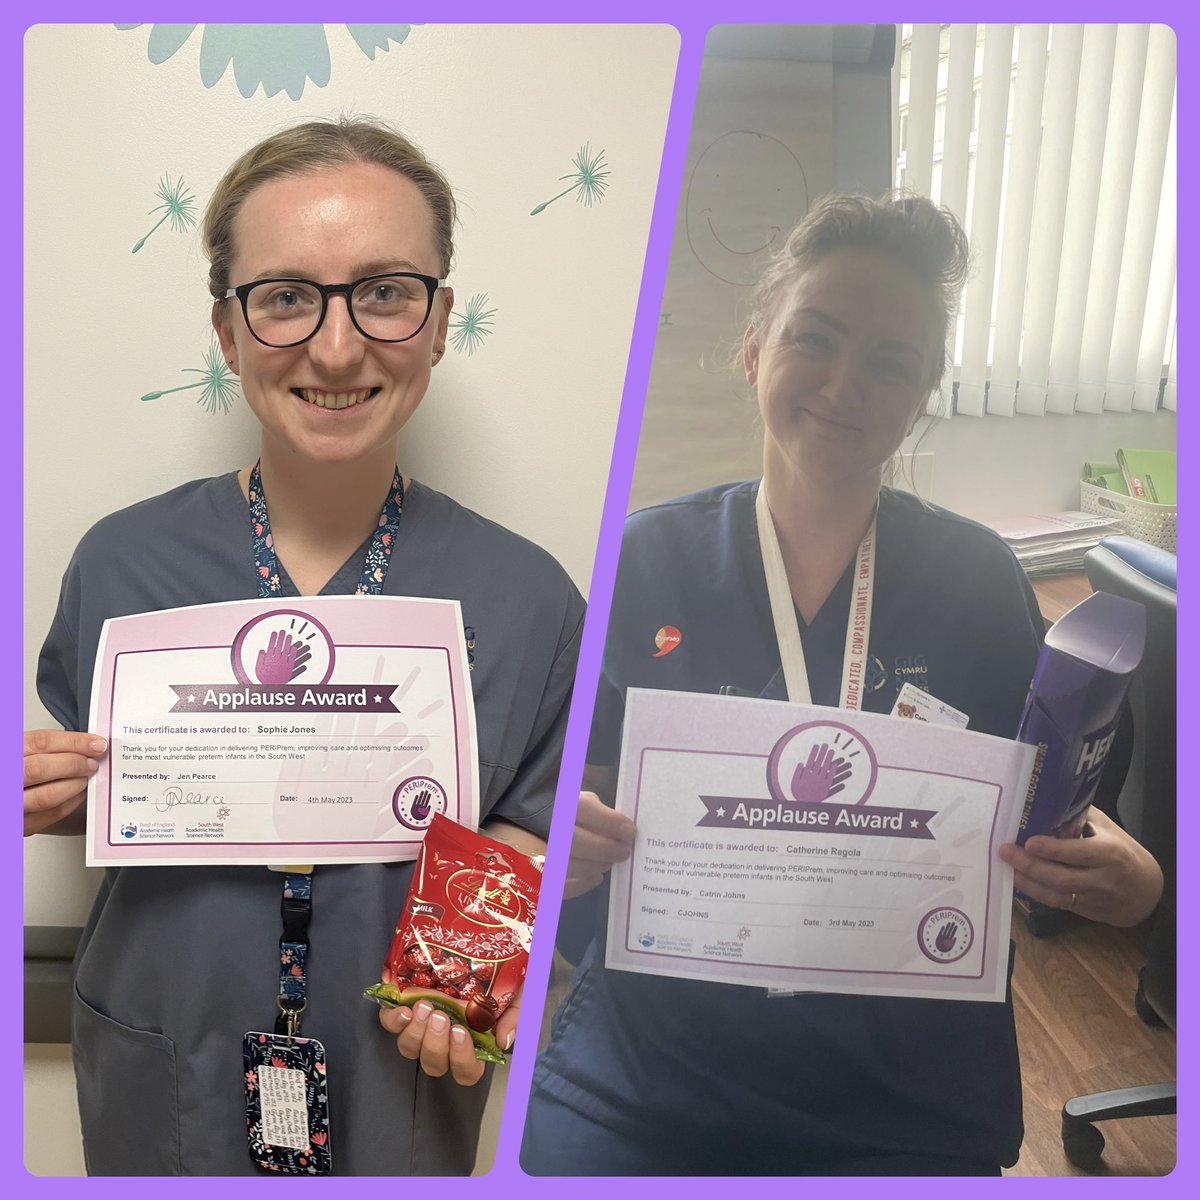 Yesterday we had our first Preterm baby born within Hywel Dda UHB and thanks to these two, we were able to successfully complete our PERIPrem Cymru optimisation tool.
@TipswaloD @LeahAndrew1991 @mattpickup87 @Catrin_Johns @PERIPremCymru @drlucyperkins @kathygrvs @BethanOsmundsen